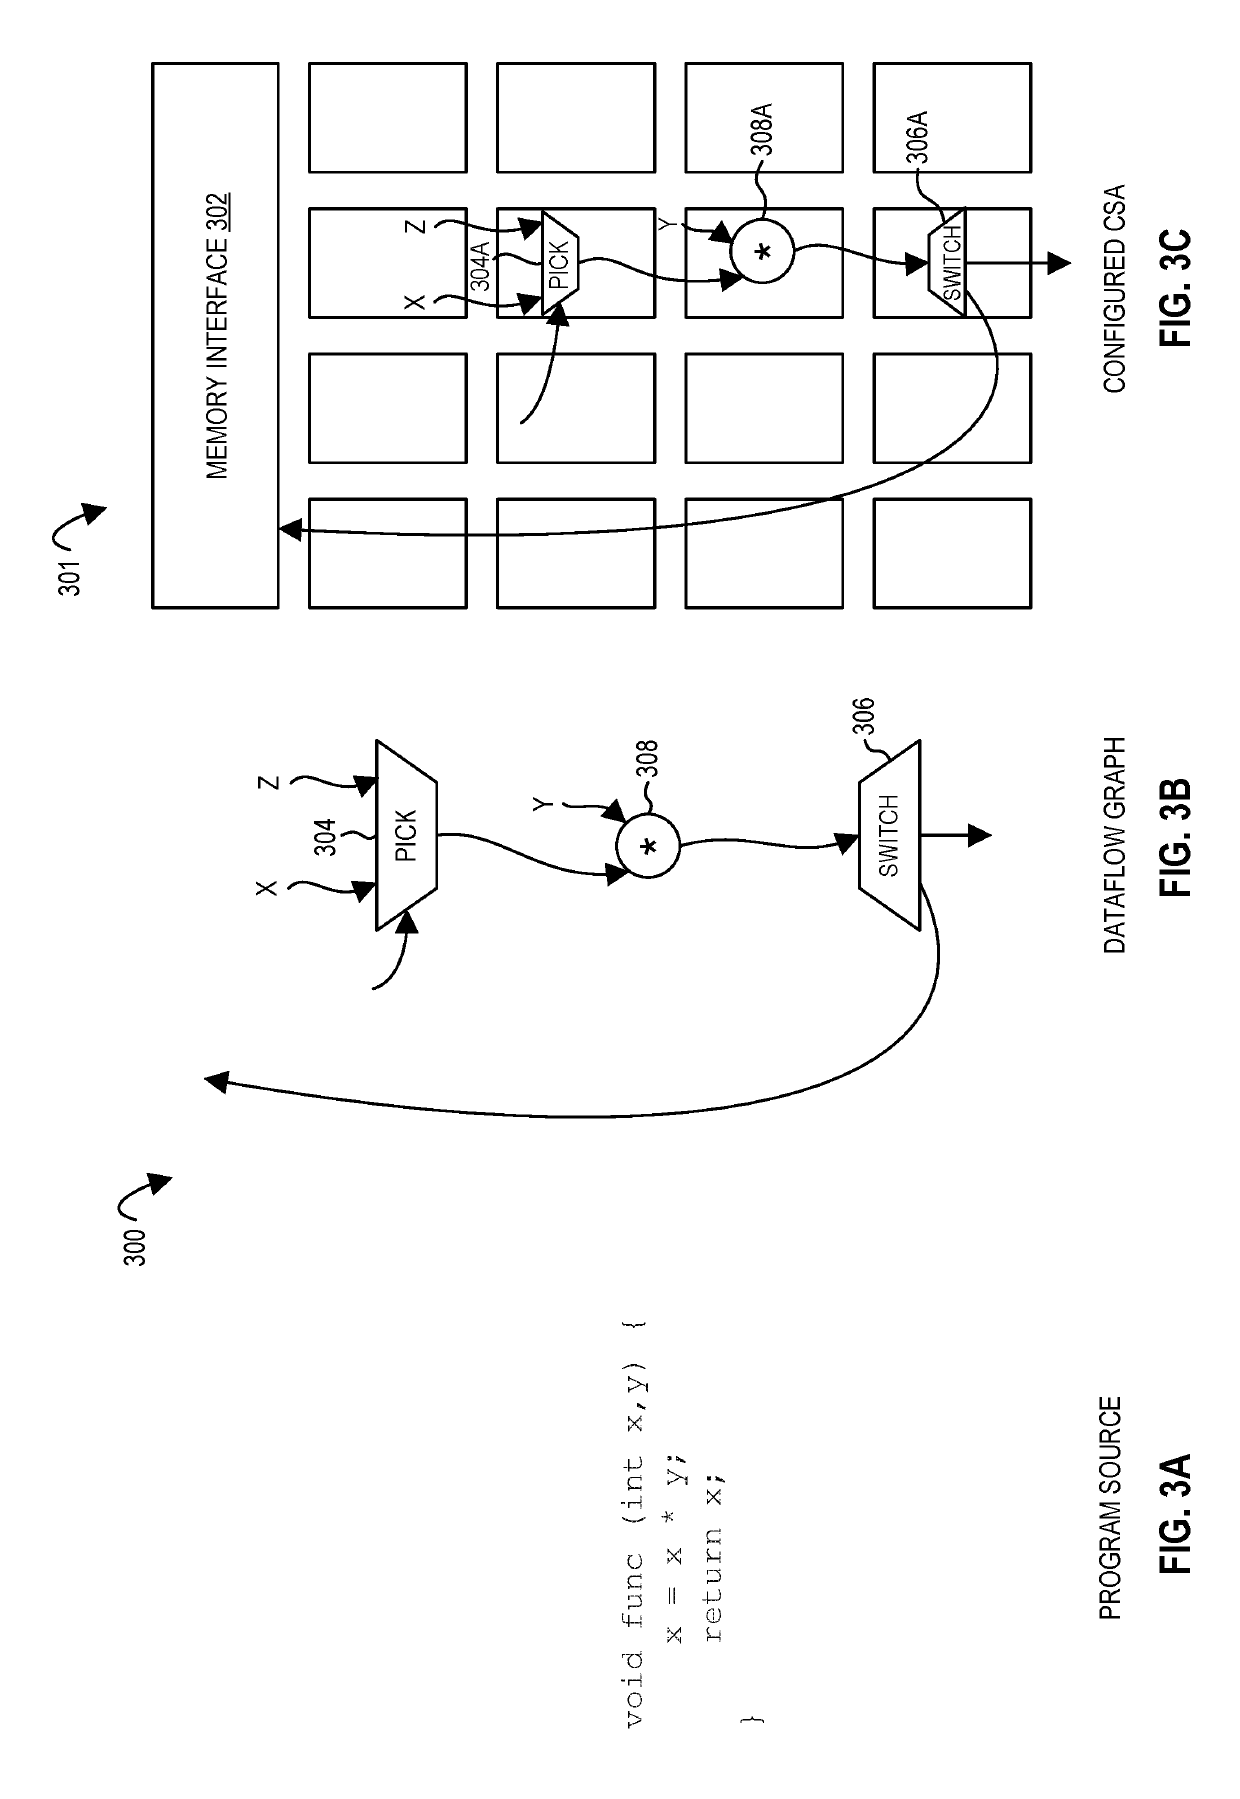 Apparatus, methods, and systems for remote memory access in a configurable spatial accelerator